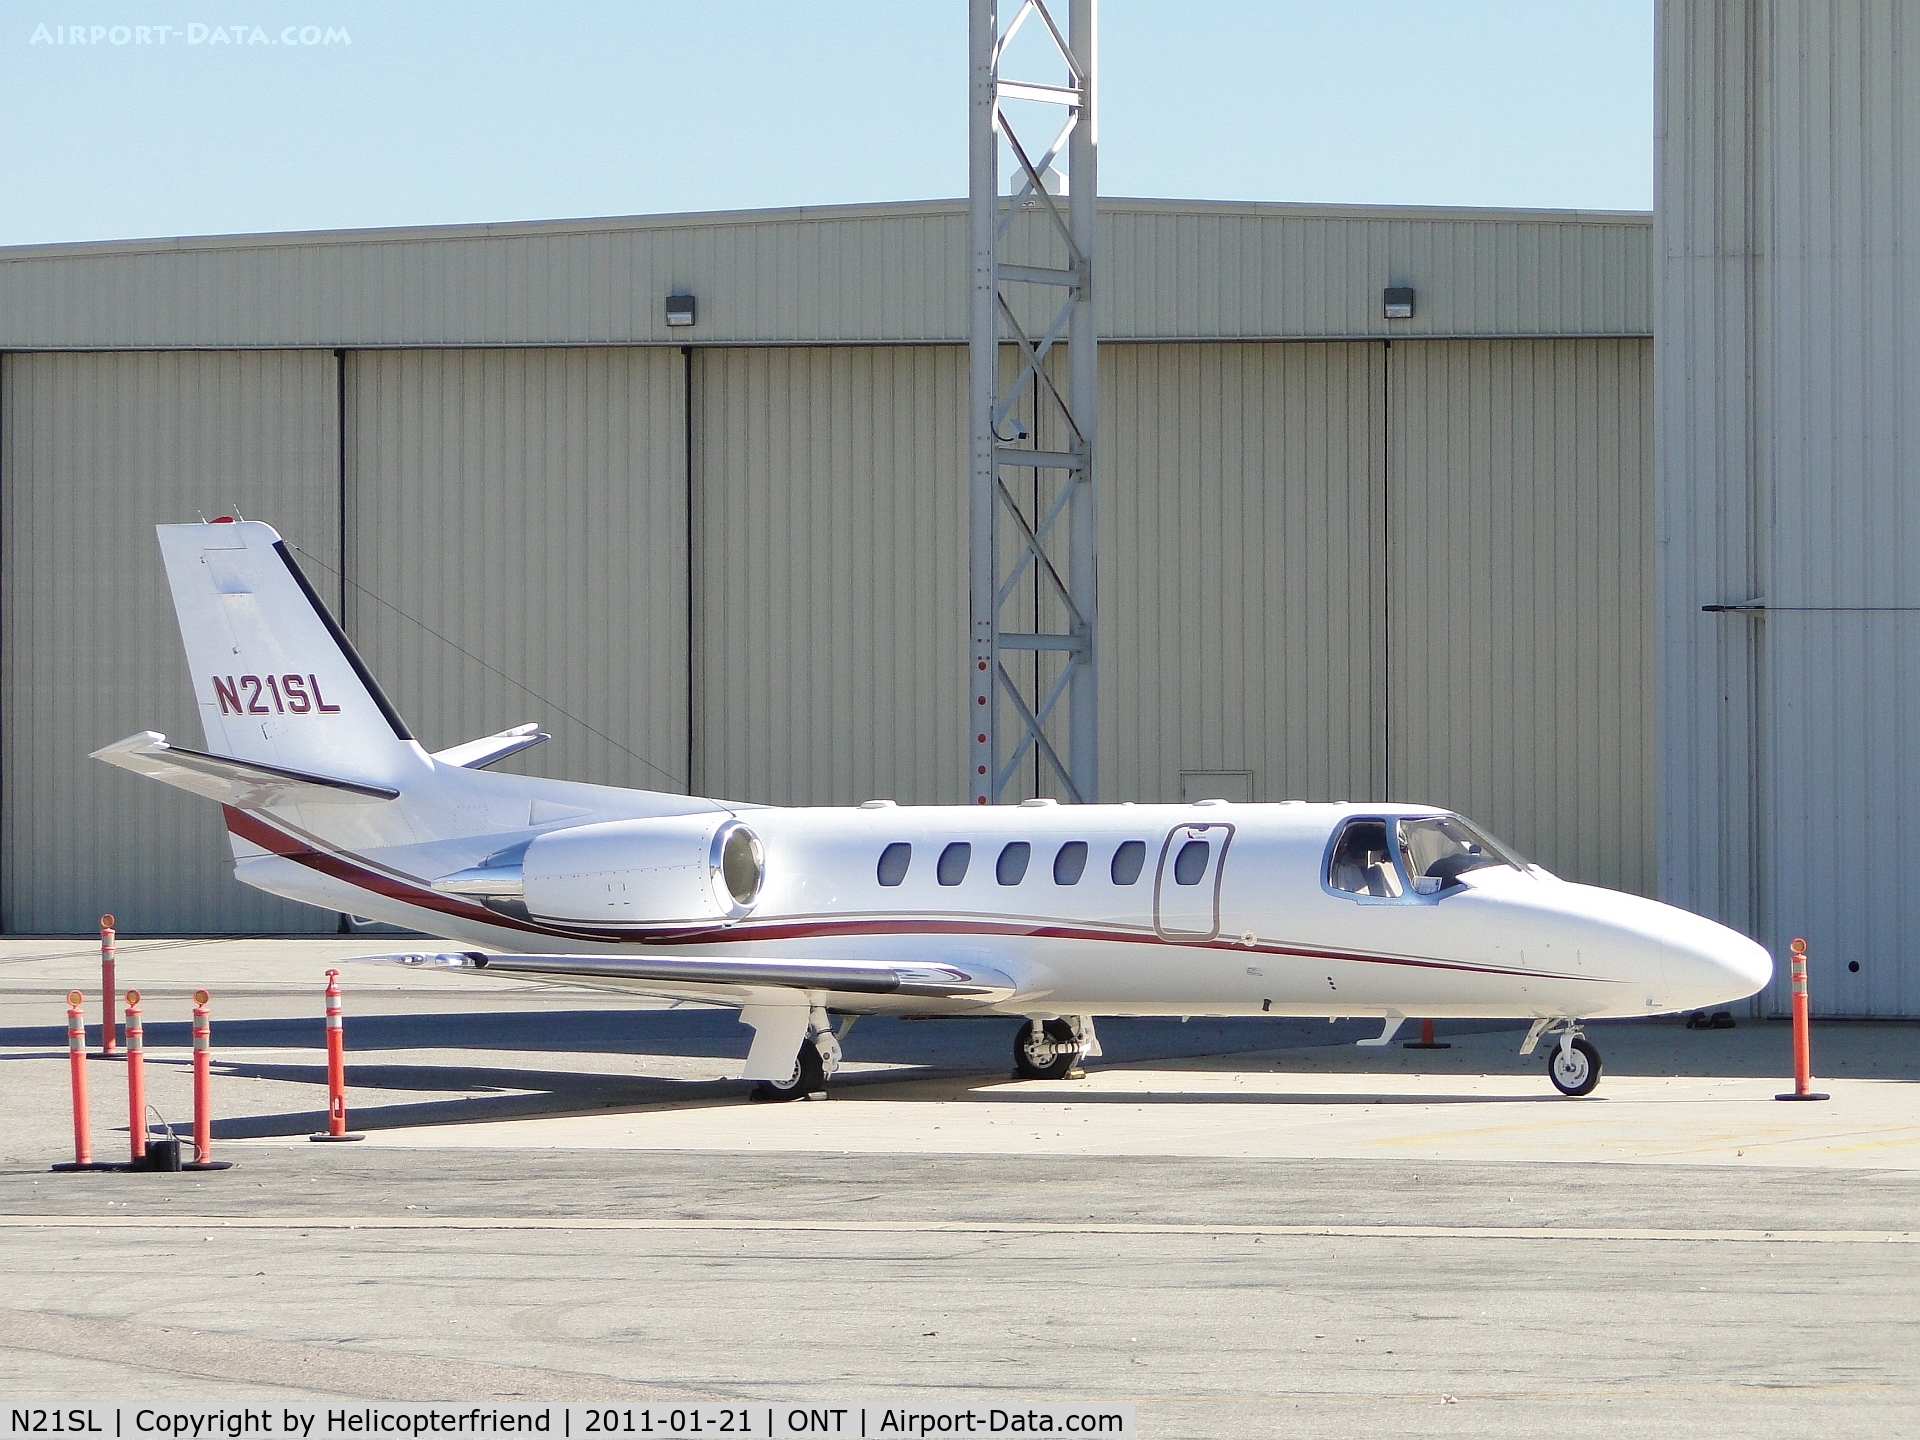 N21SL, 1999 Cessna 550 Citation Bravo C/N 550-0877, Parked and waiting on the southside